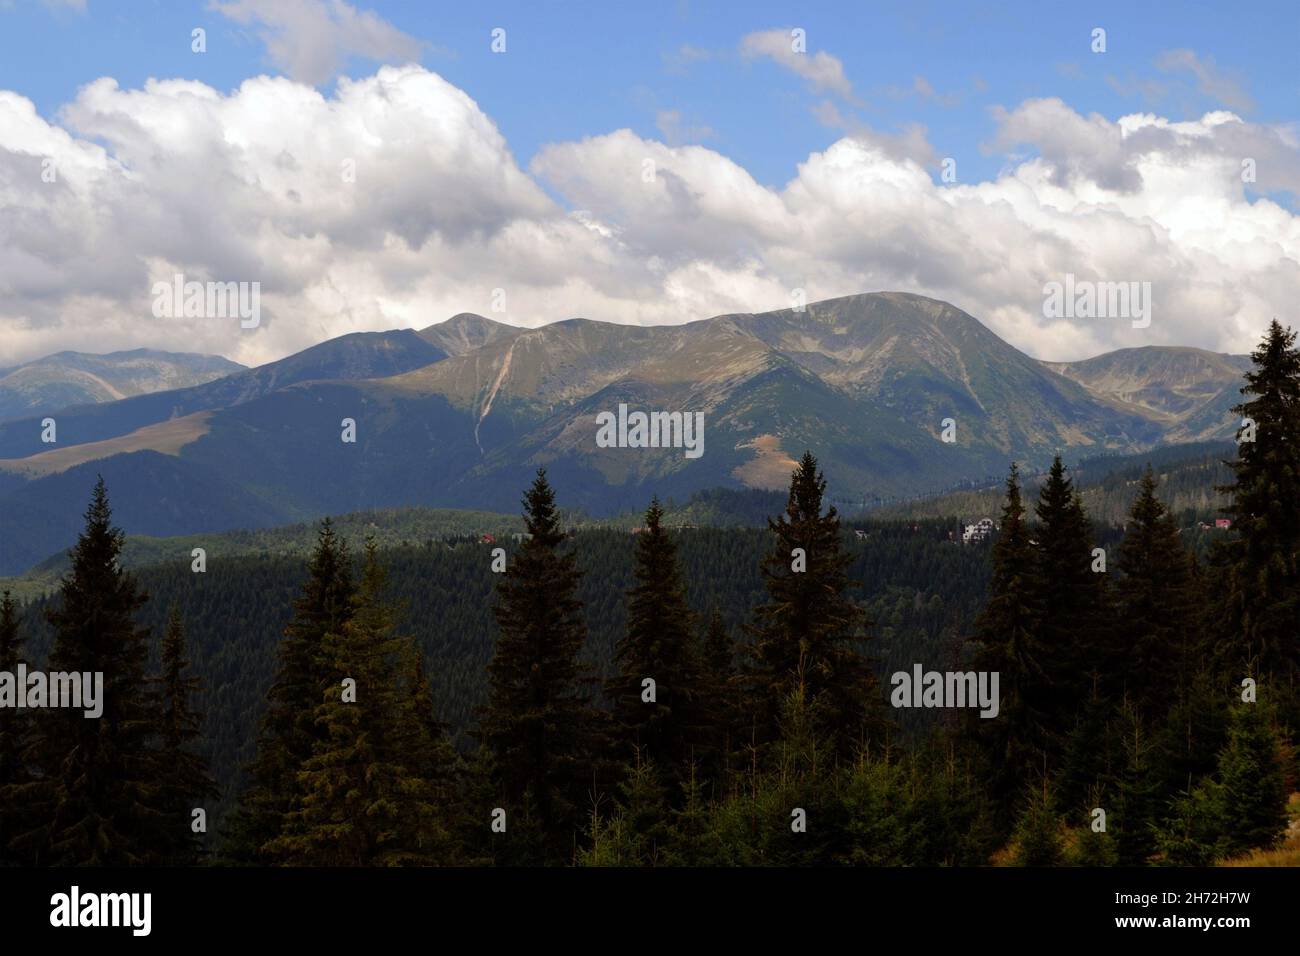 Panorama of the Parang mountains from the Southern Carpathians, the mountain group Parâng - Șureanu - Lotrului, being the largest in terms of the moun Stock Photo